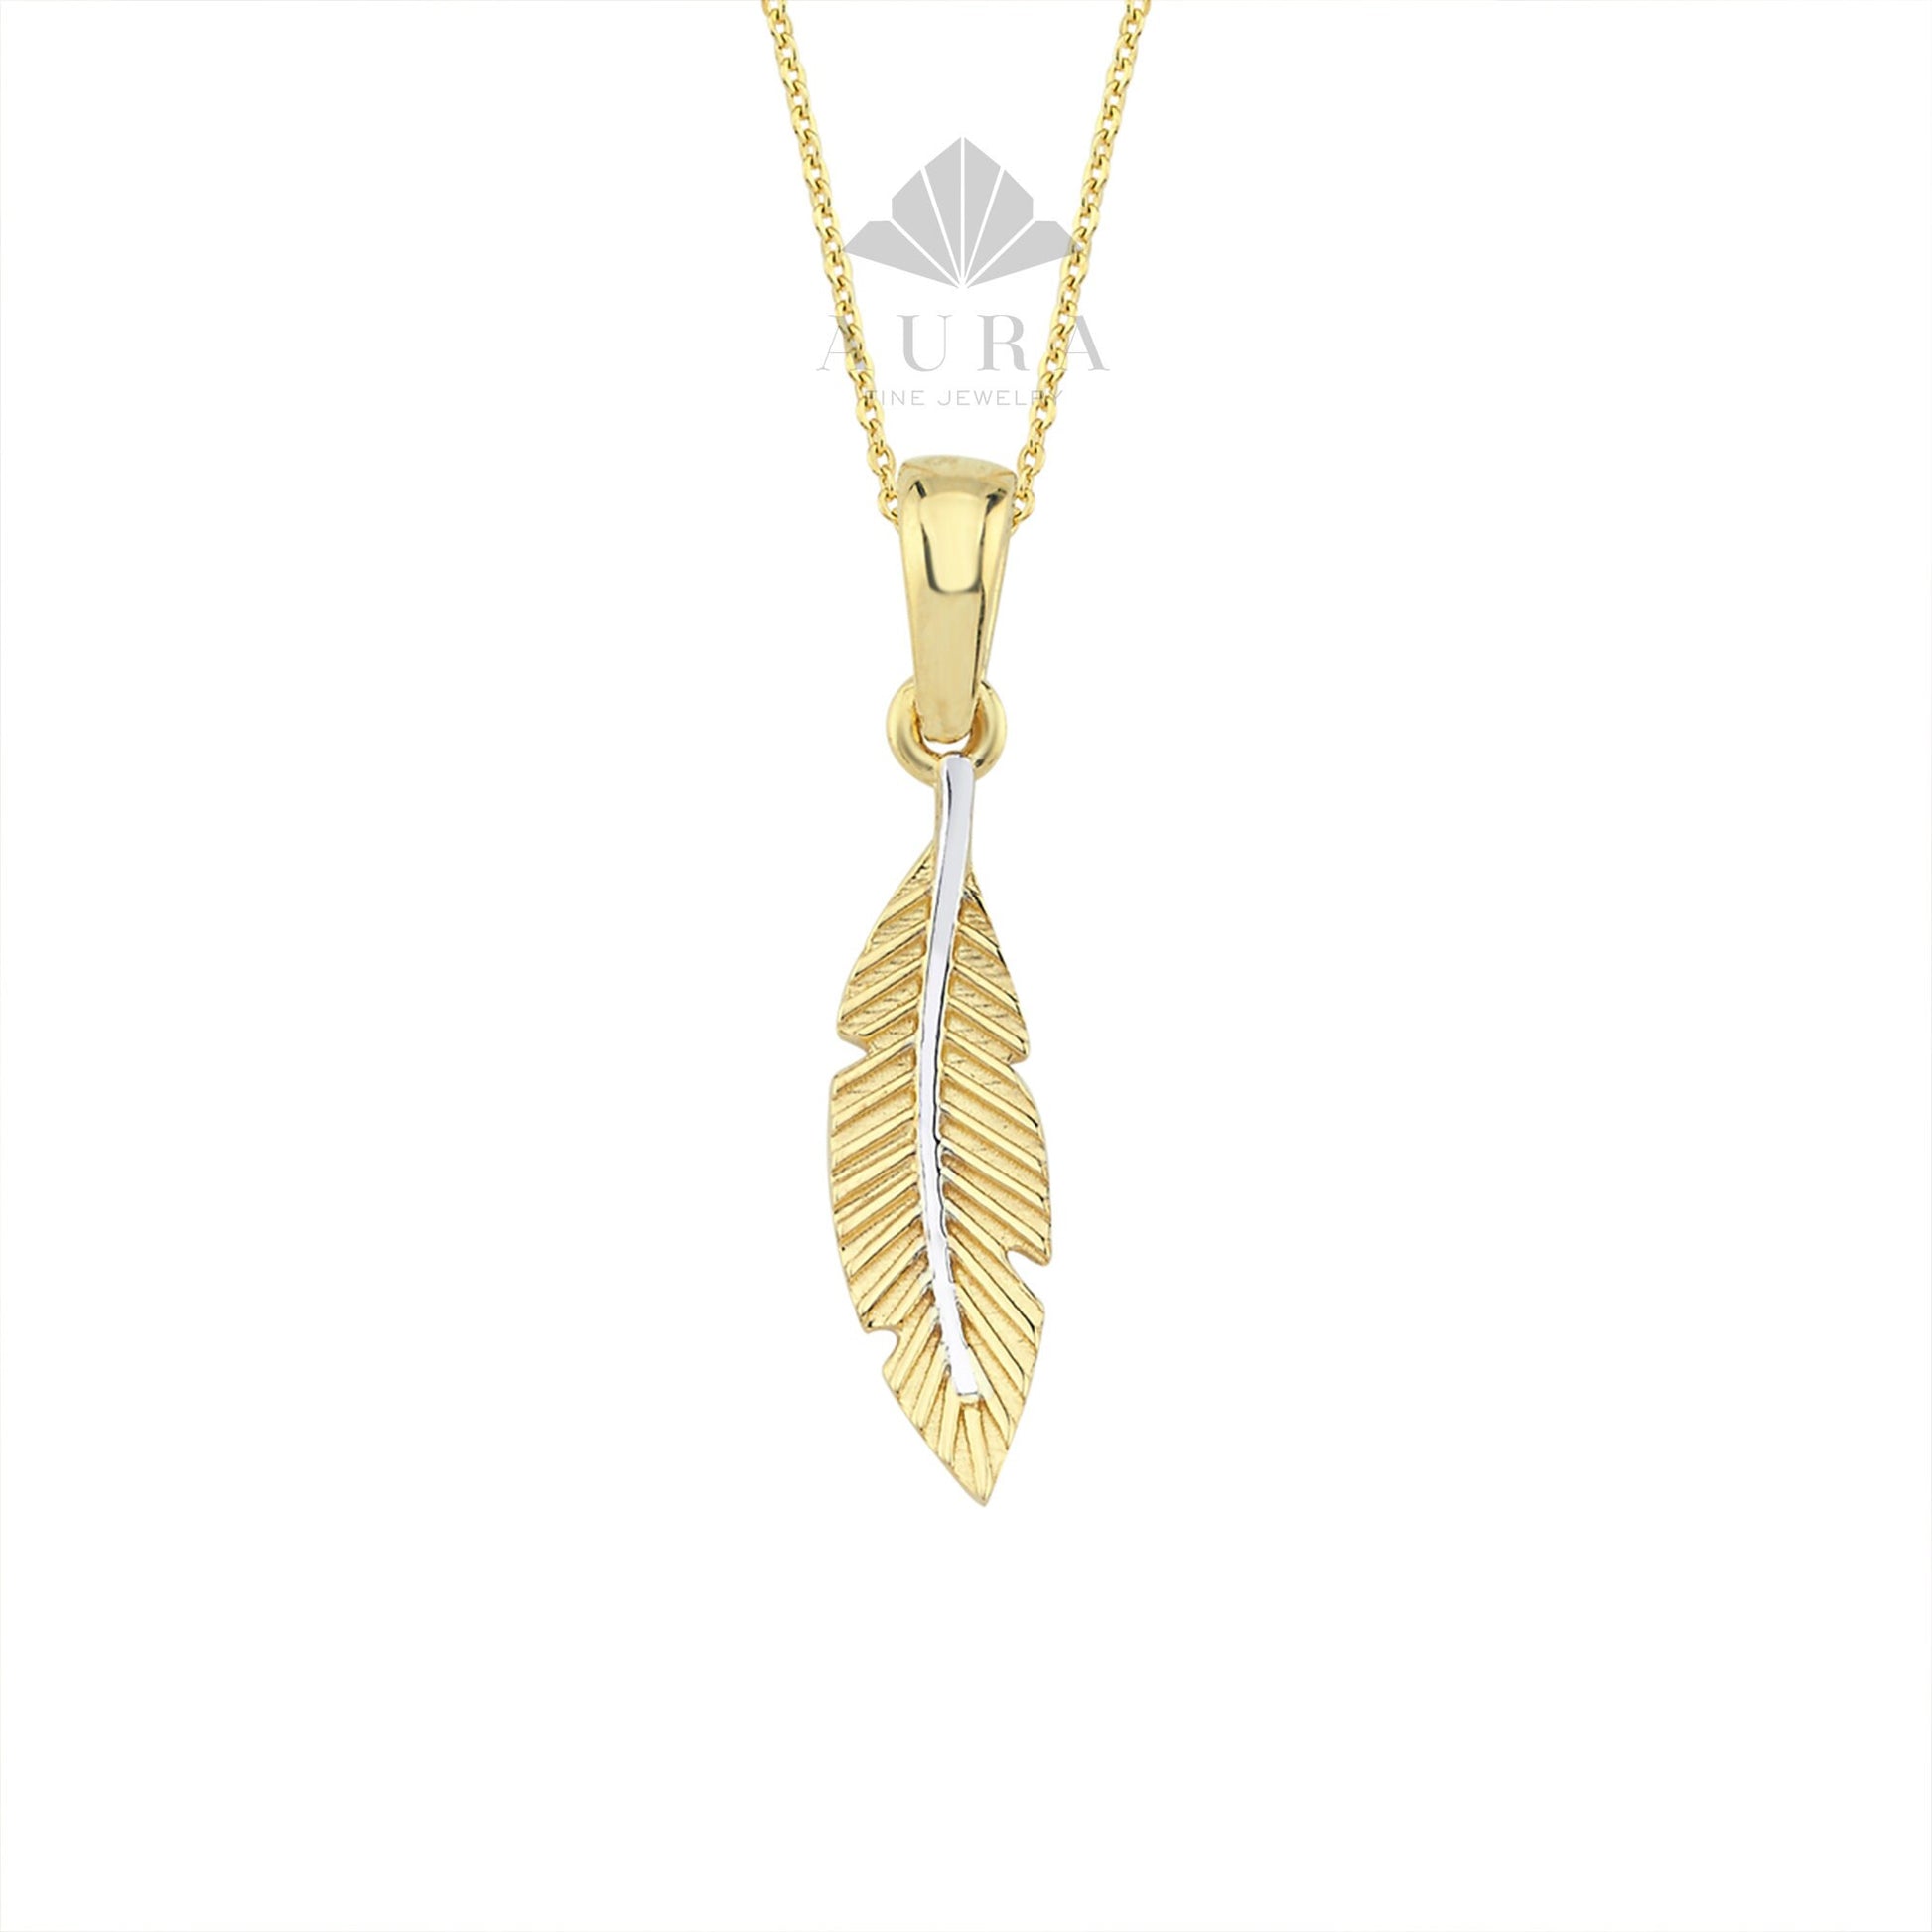 14K Gold Feather Necklace, Lucky Feather Necklace, Feather Charm Choker, Layered Necklace, Anniversary Gift, Birthday Gift, Gift For Her